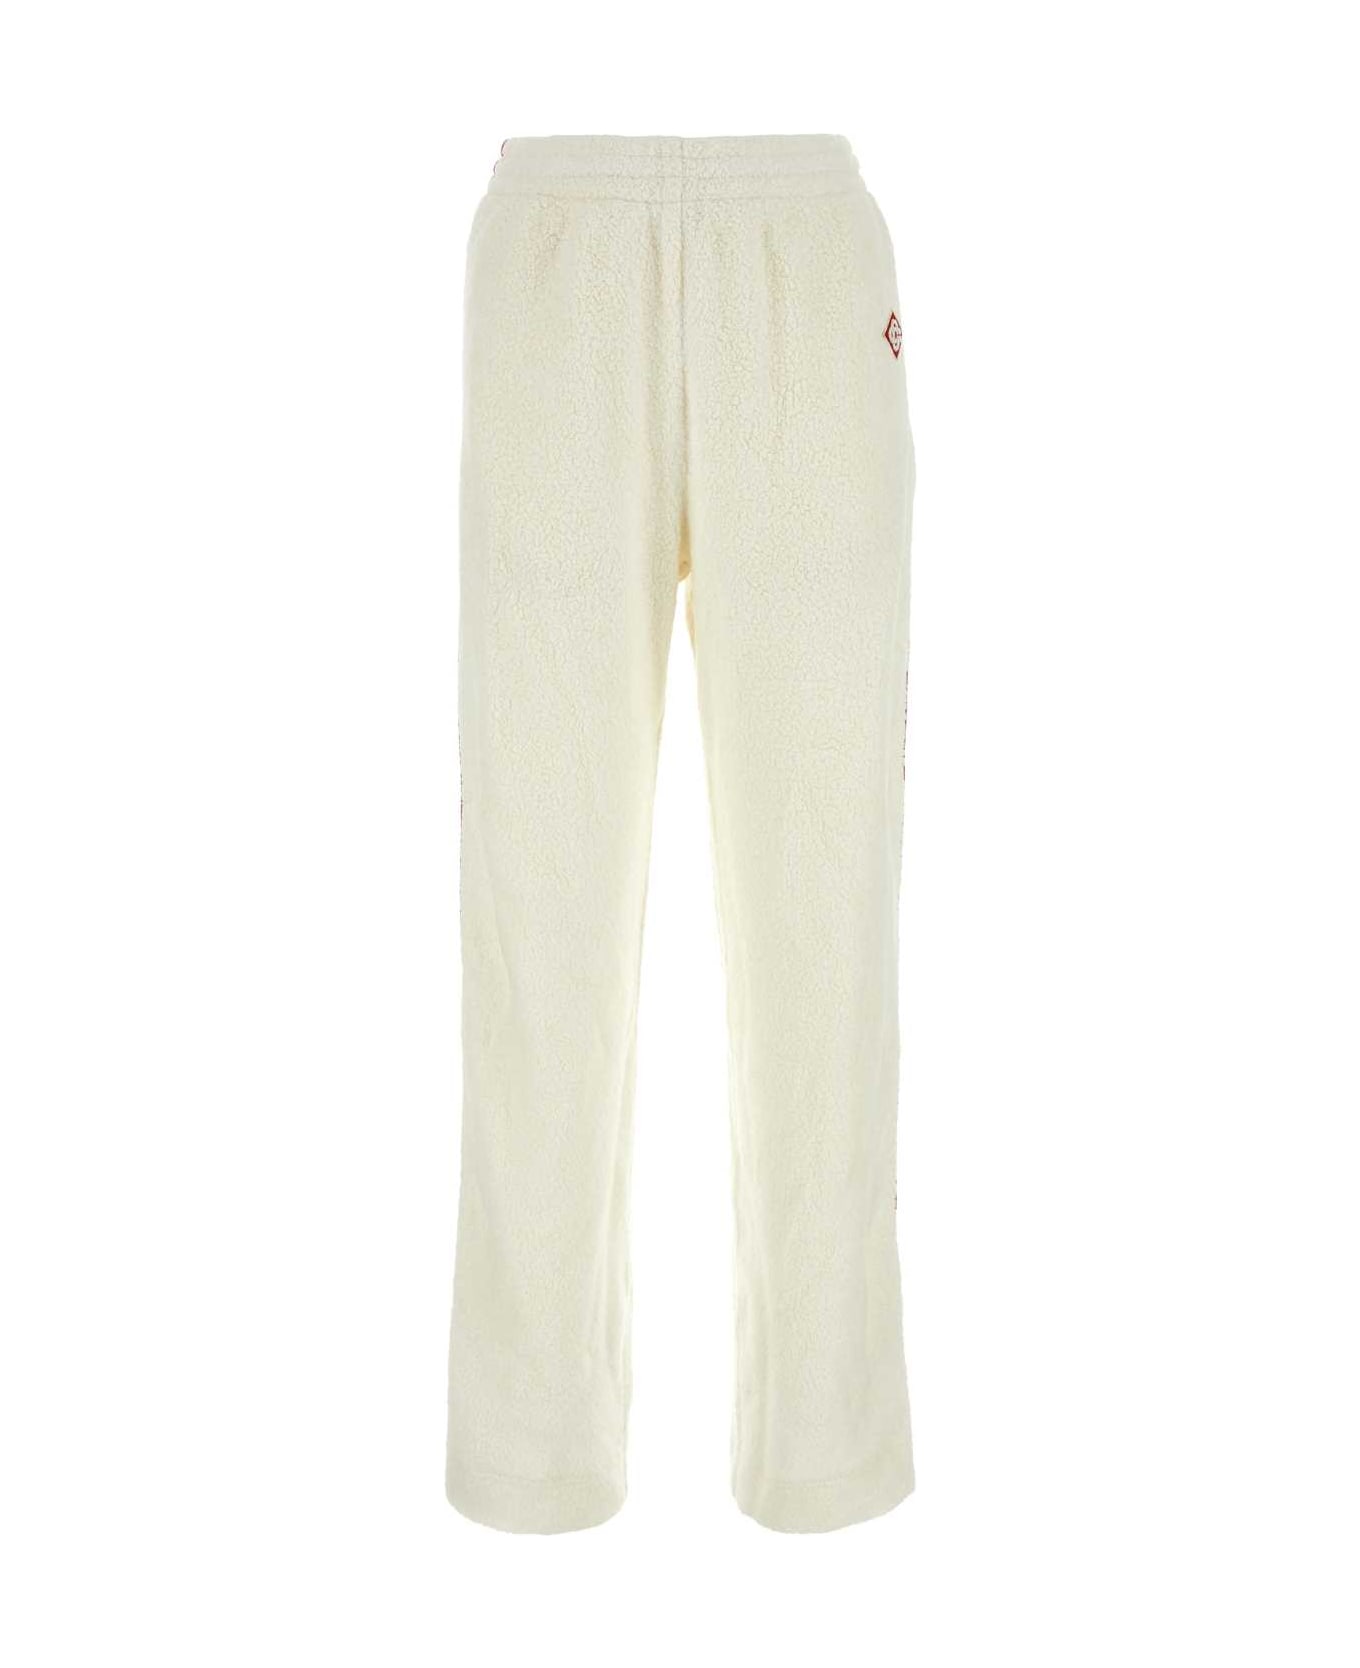 Casablanca Ivory Terry Fabric Joggers - OFFWHITE